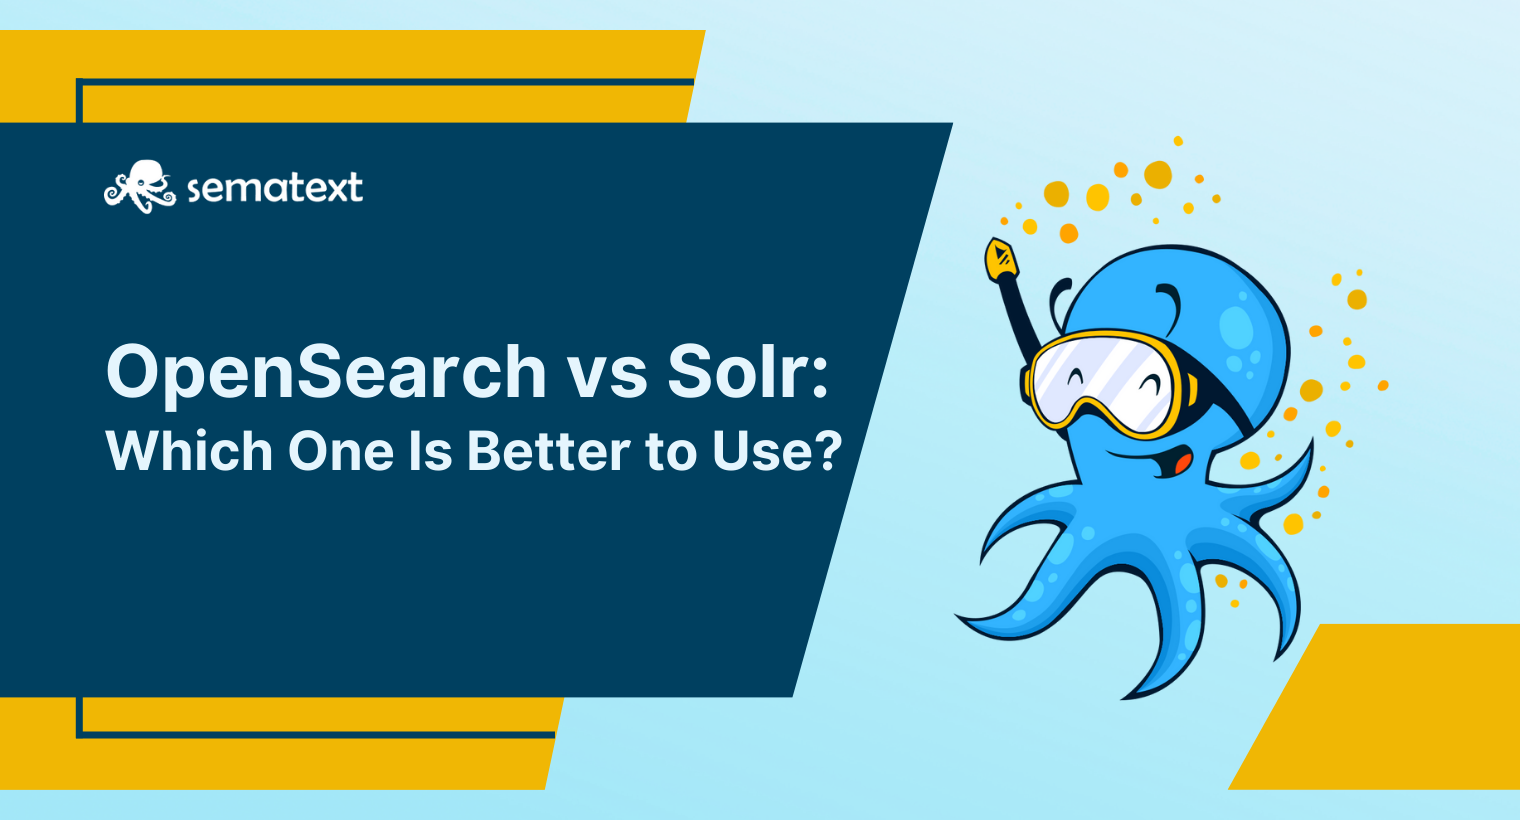 OpenSearch vs Solr: Which One Is Better to Use?